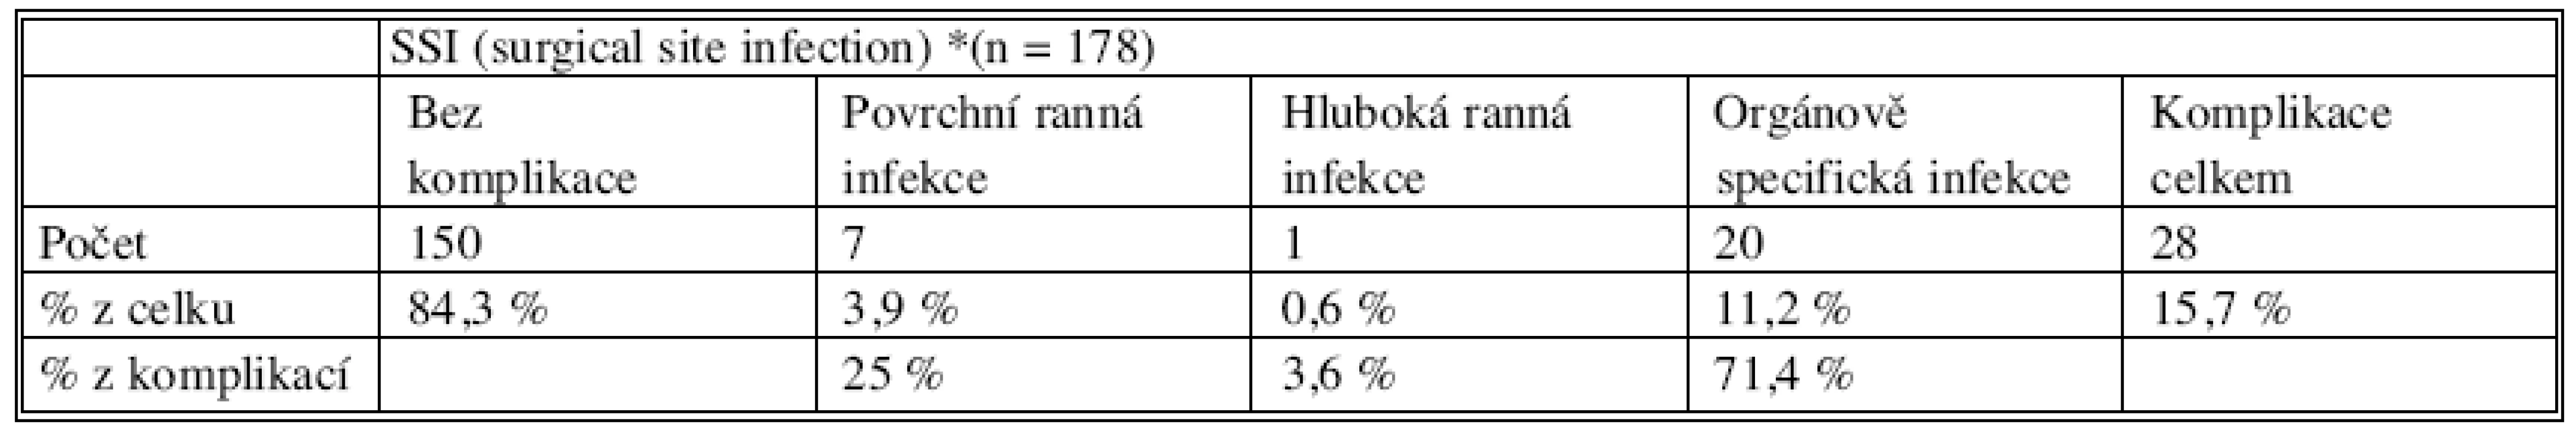 Infekční ranné komplikace podle Guideline for prevention of surgical site infection [2] (*missing values)
Tab. 4. Early infectious complications according to the Guideline for prevention of surgical site infection [2] (*missing values)